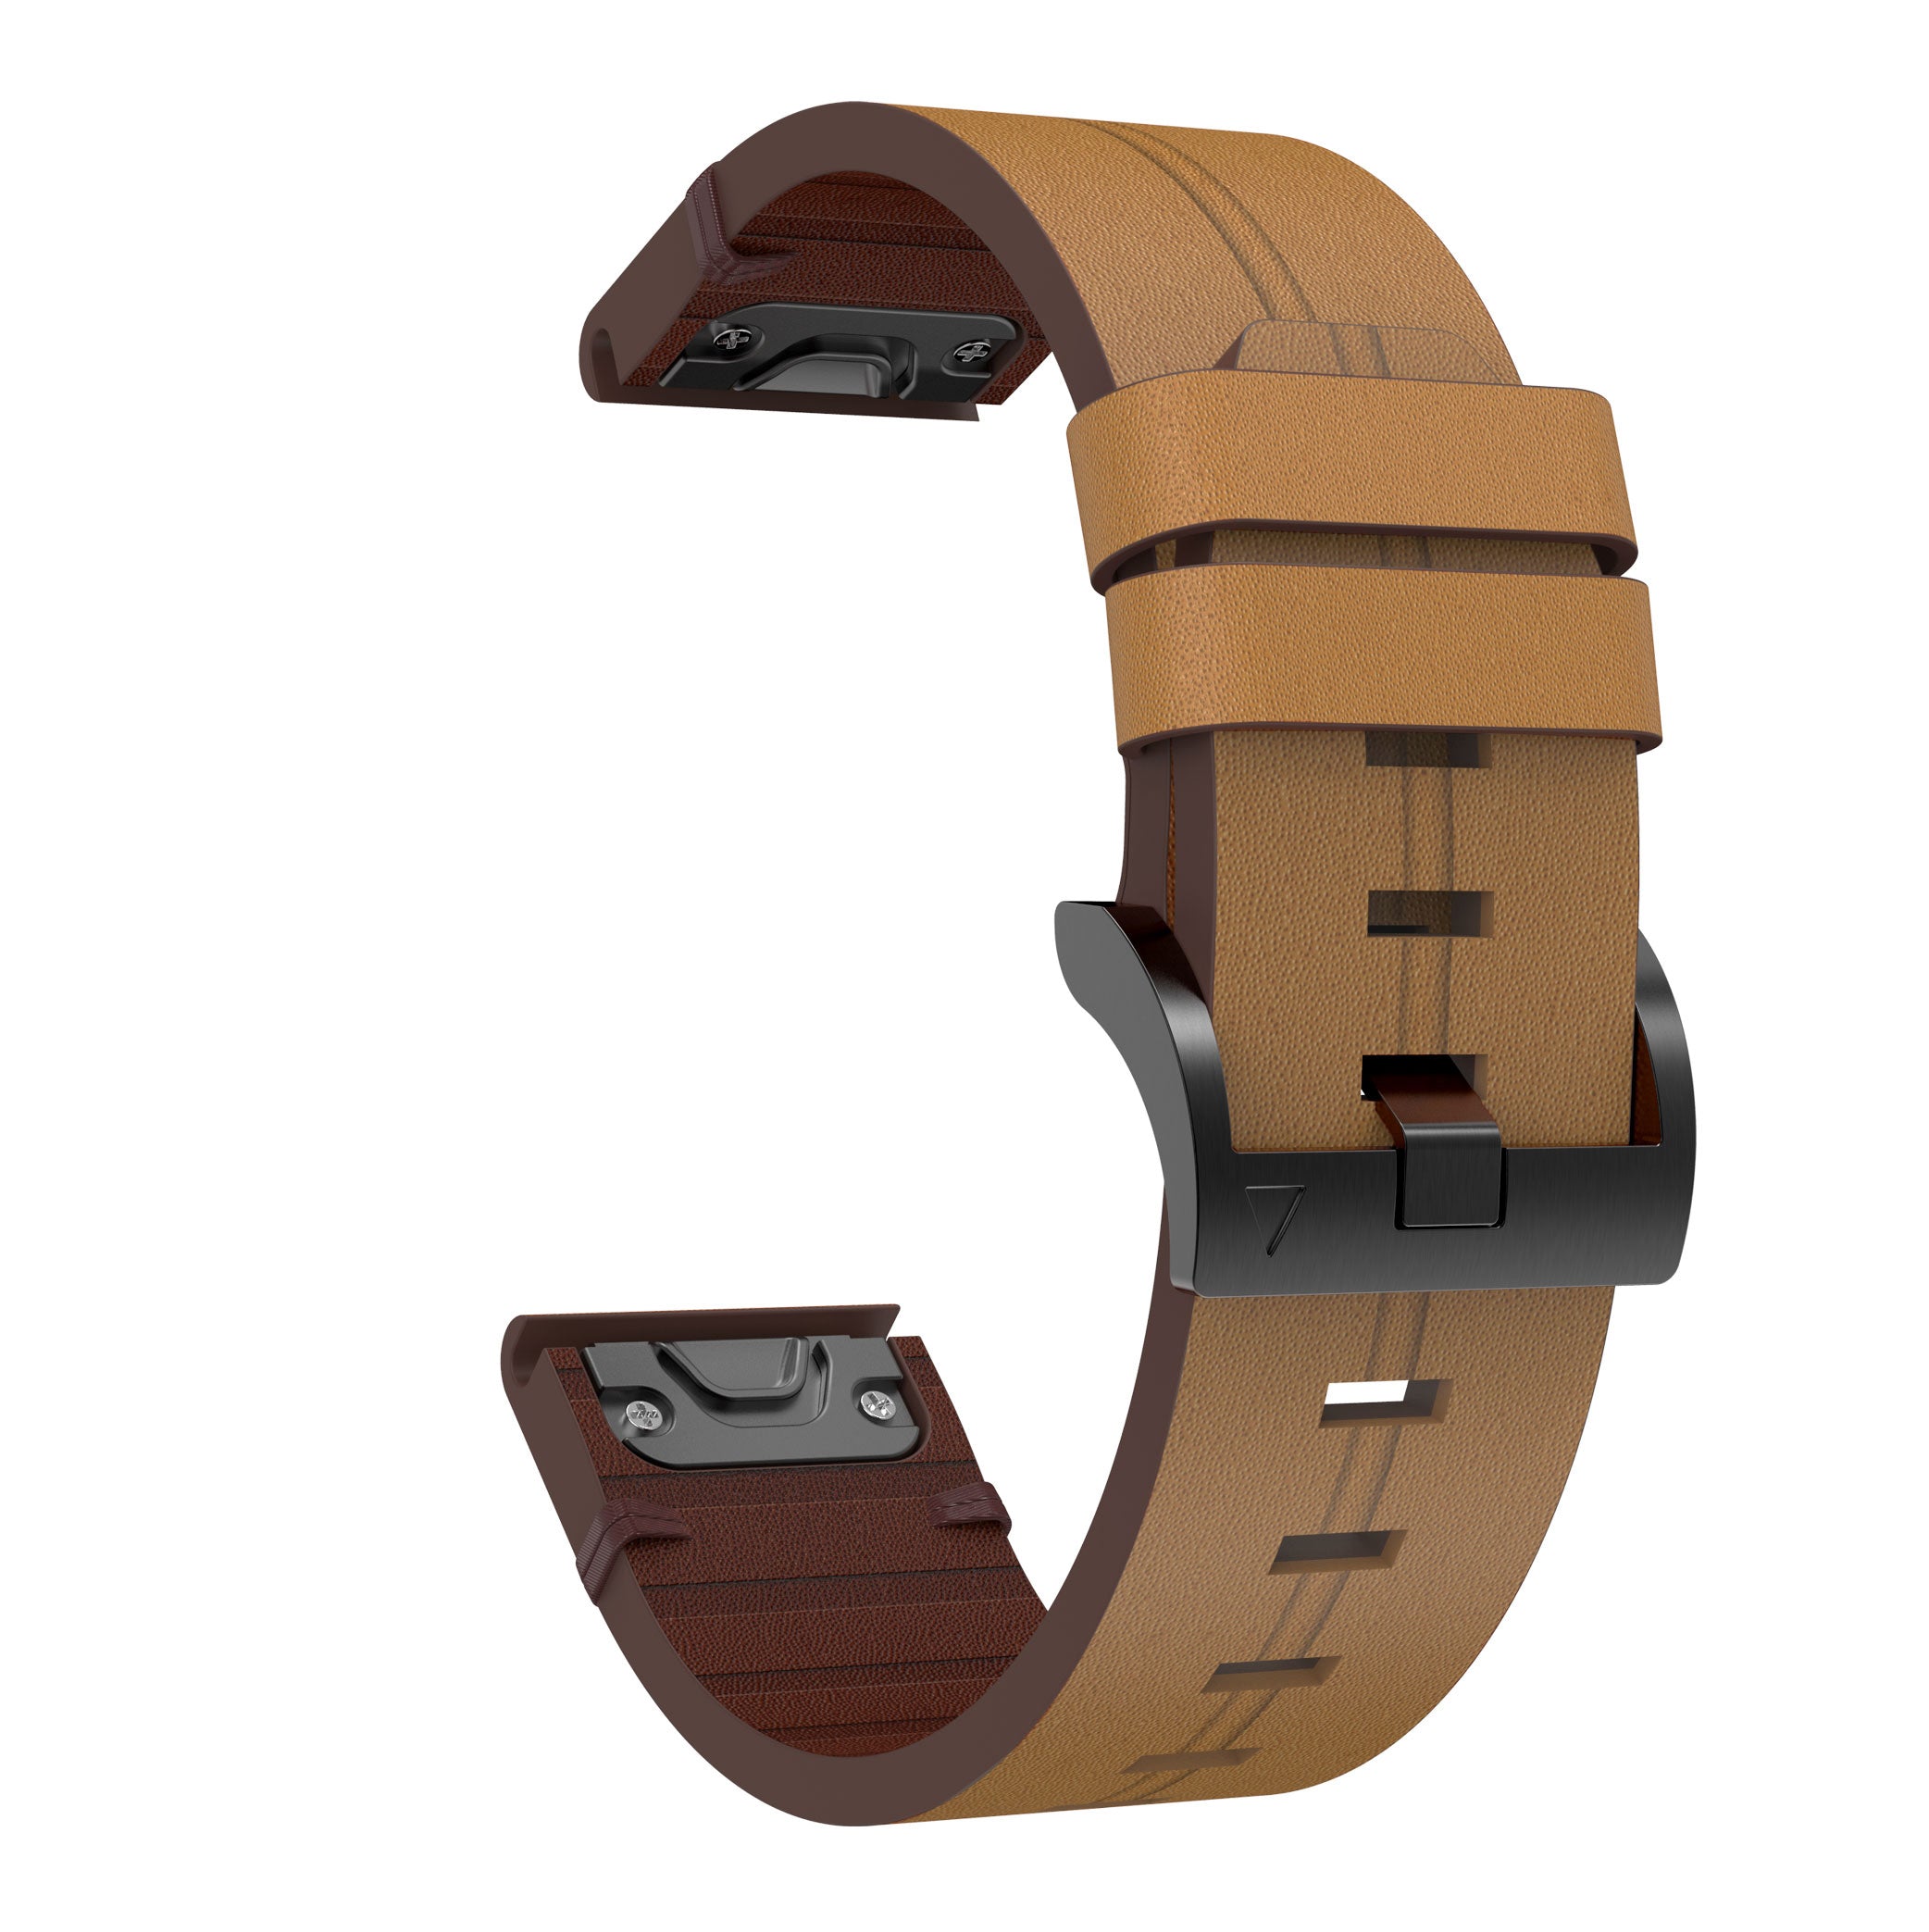 Genuine Leather Smart Watch Replacement Band for Garmin Fenix 6X - Brown